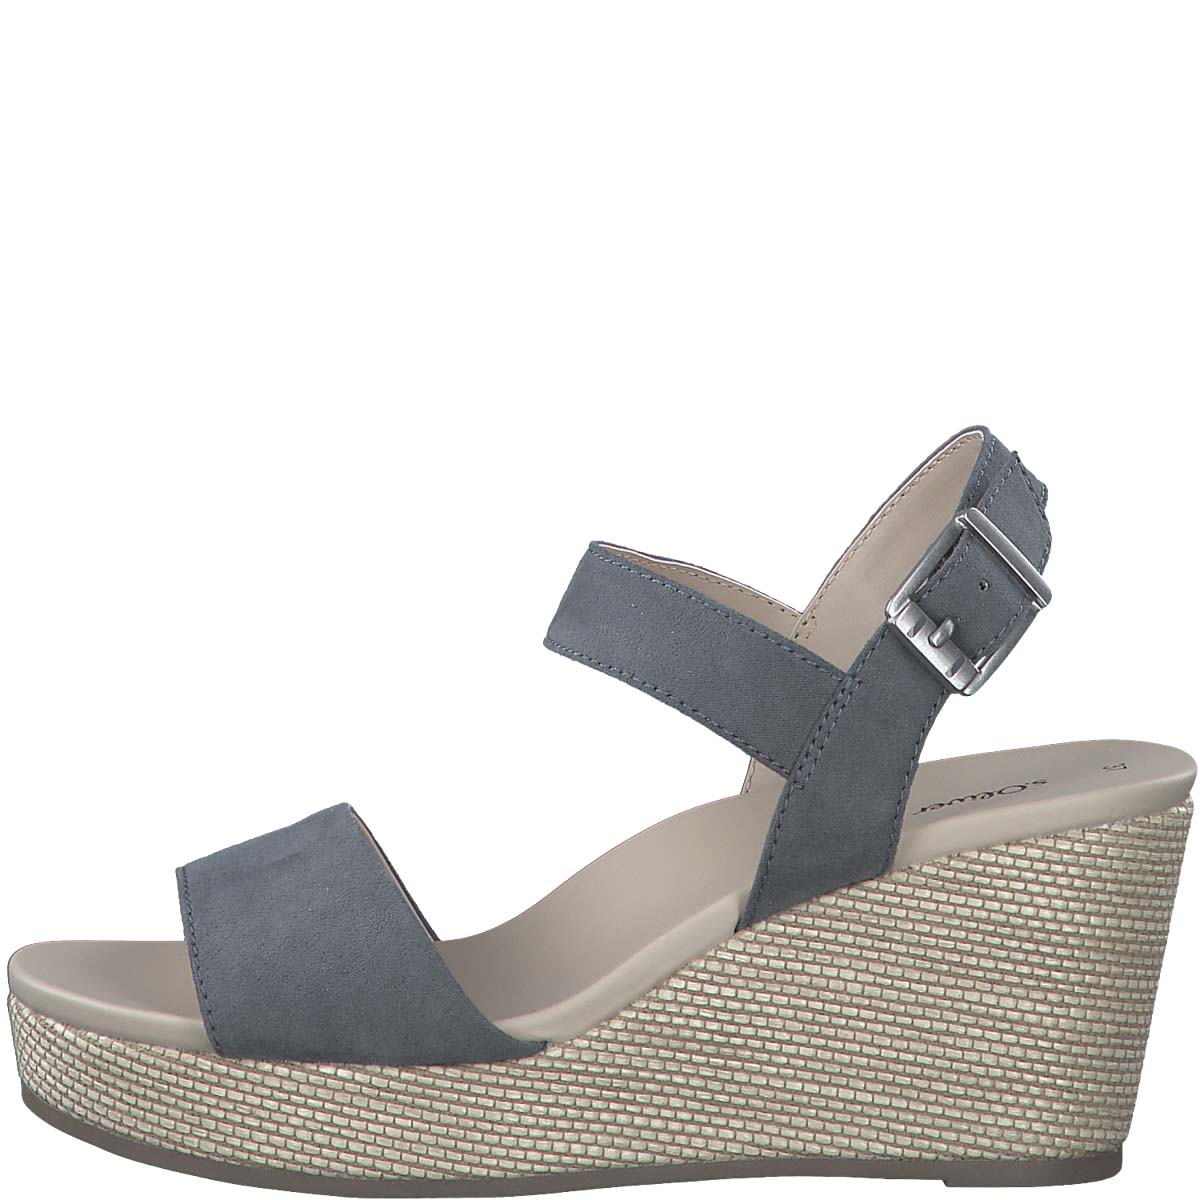 Blue Bliss: Stylish Platform Wedge Sandals for Unforgettable Summers